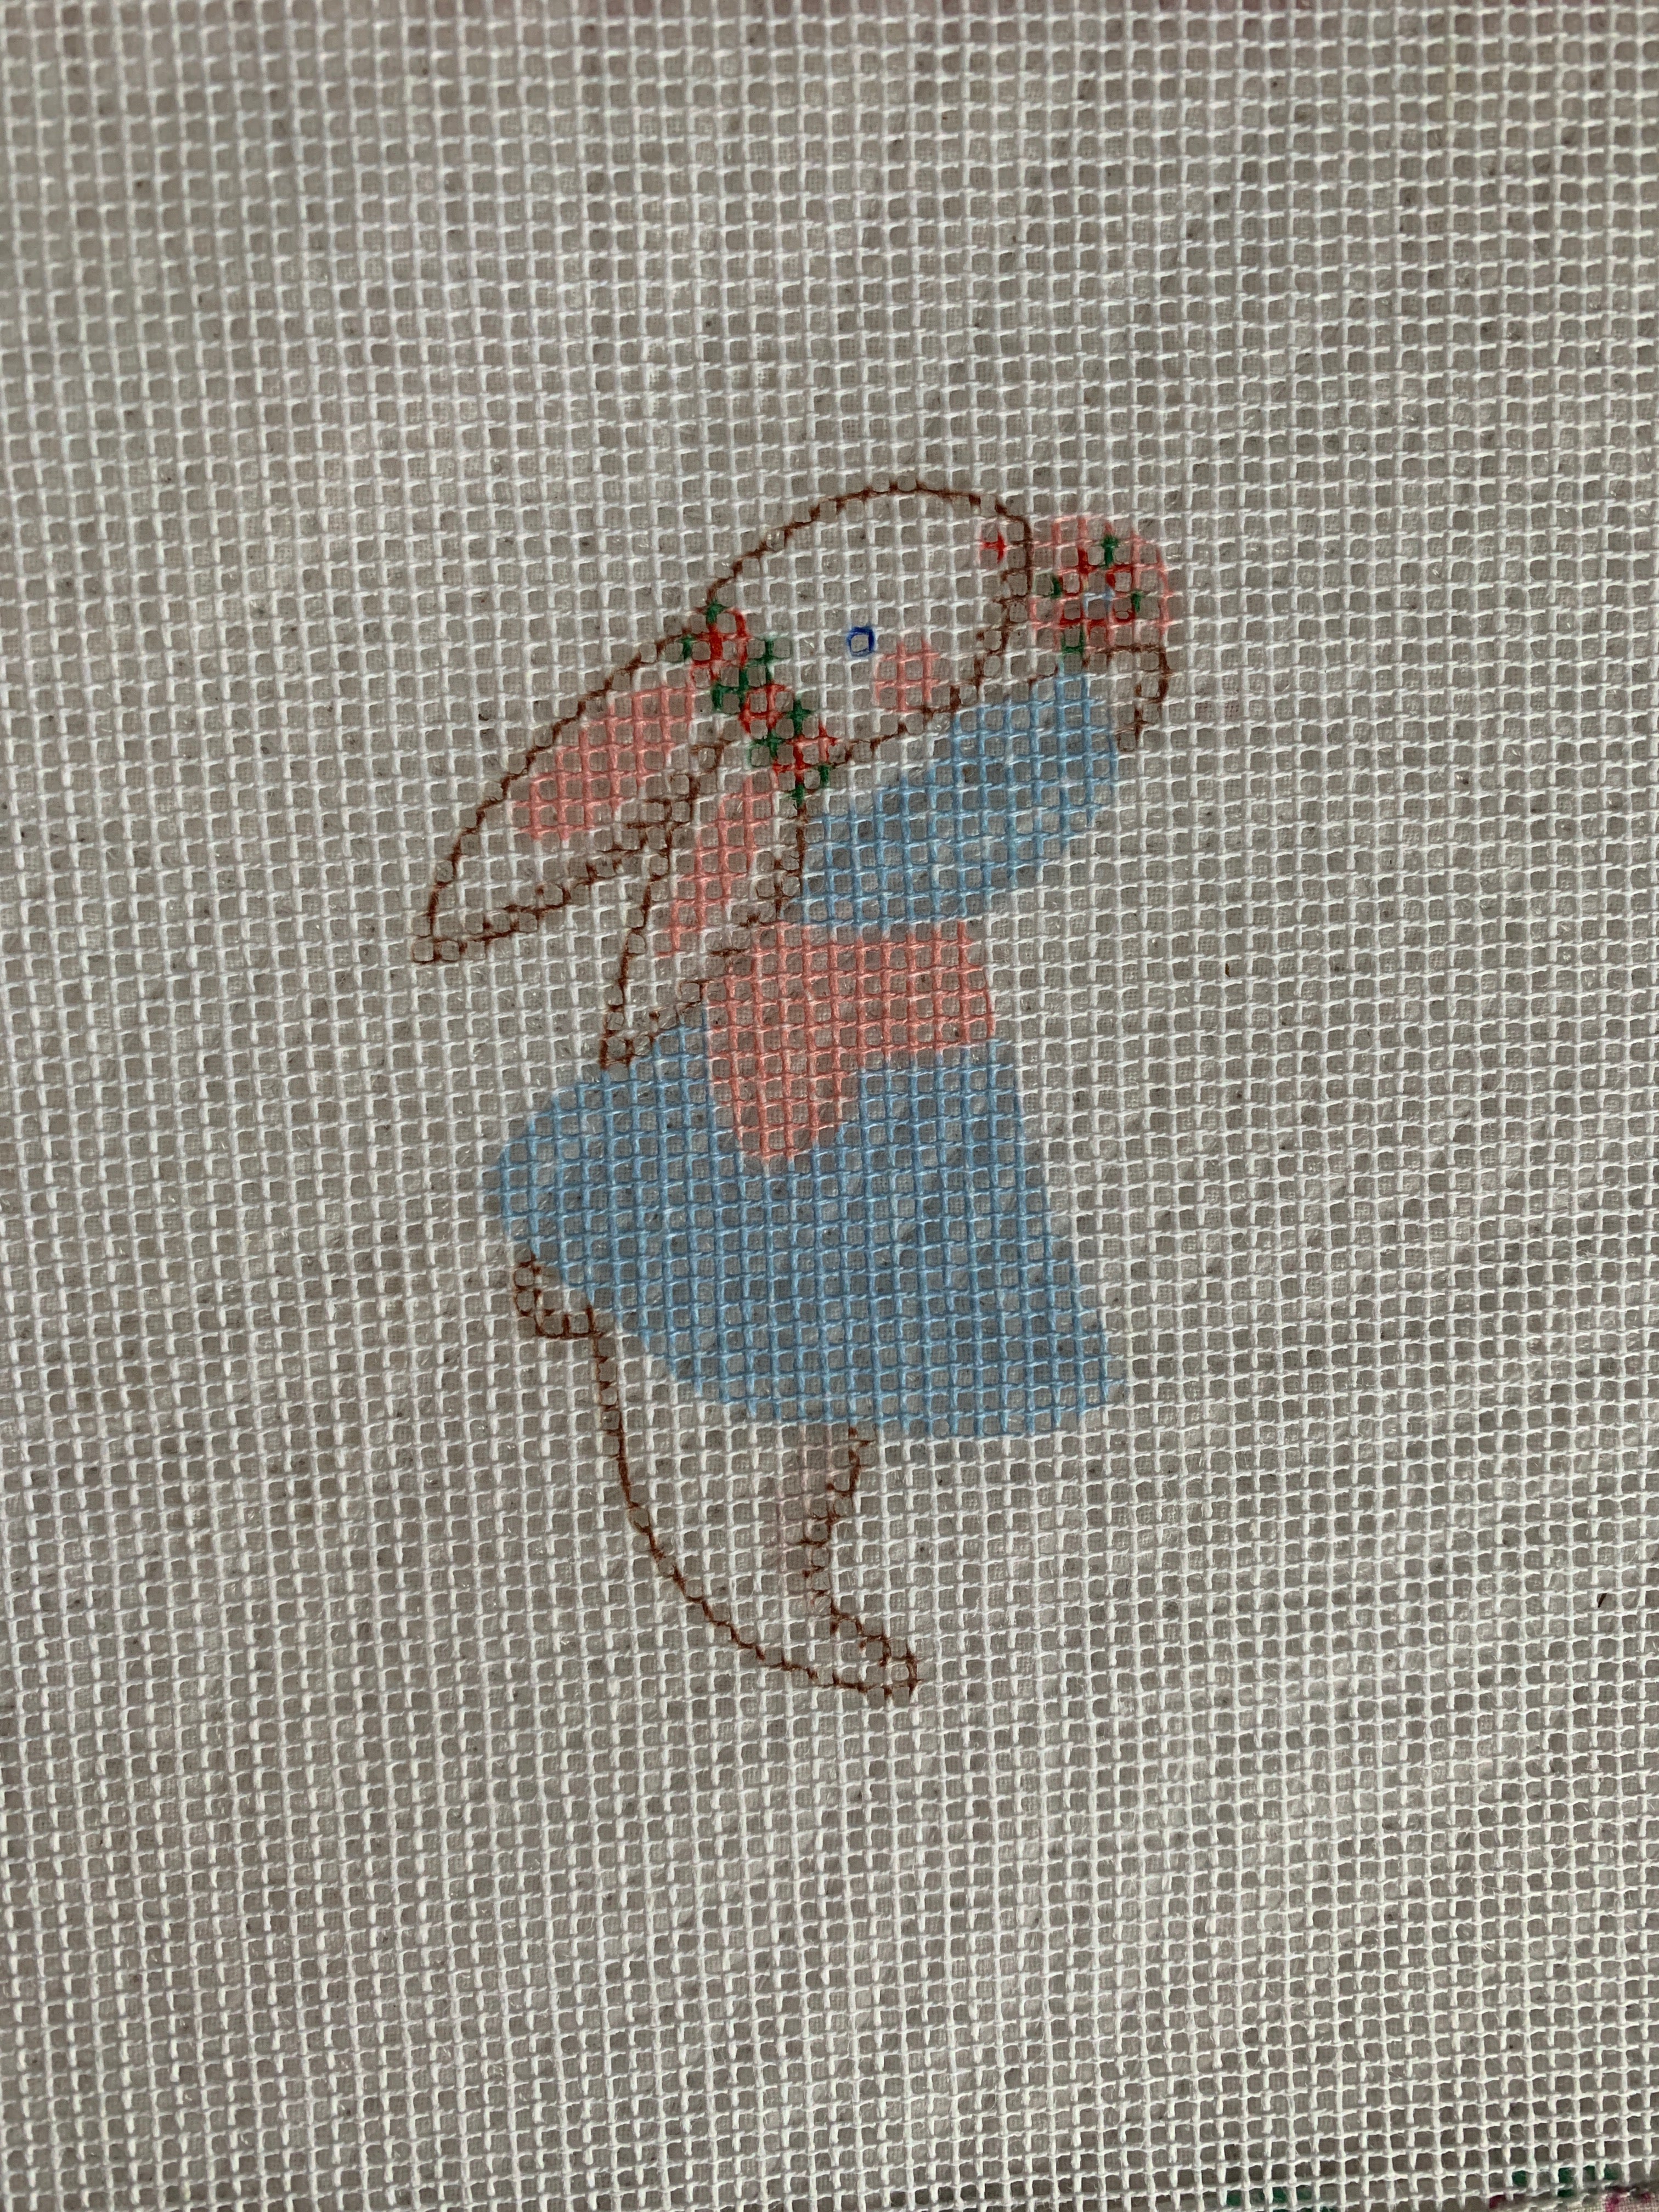 Needlepoint Girl Bunny - Premium  from Tricia Lowenfield Design 